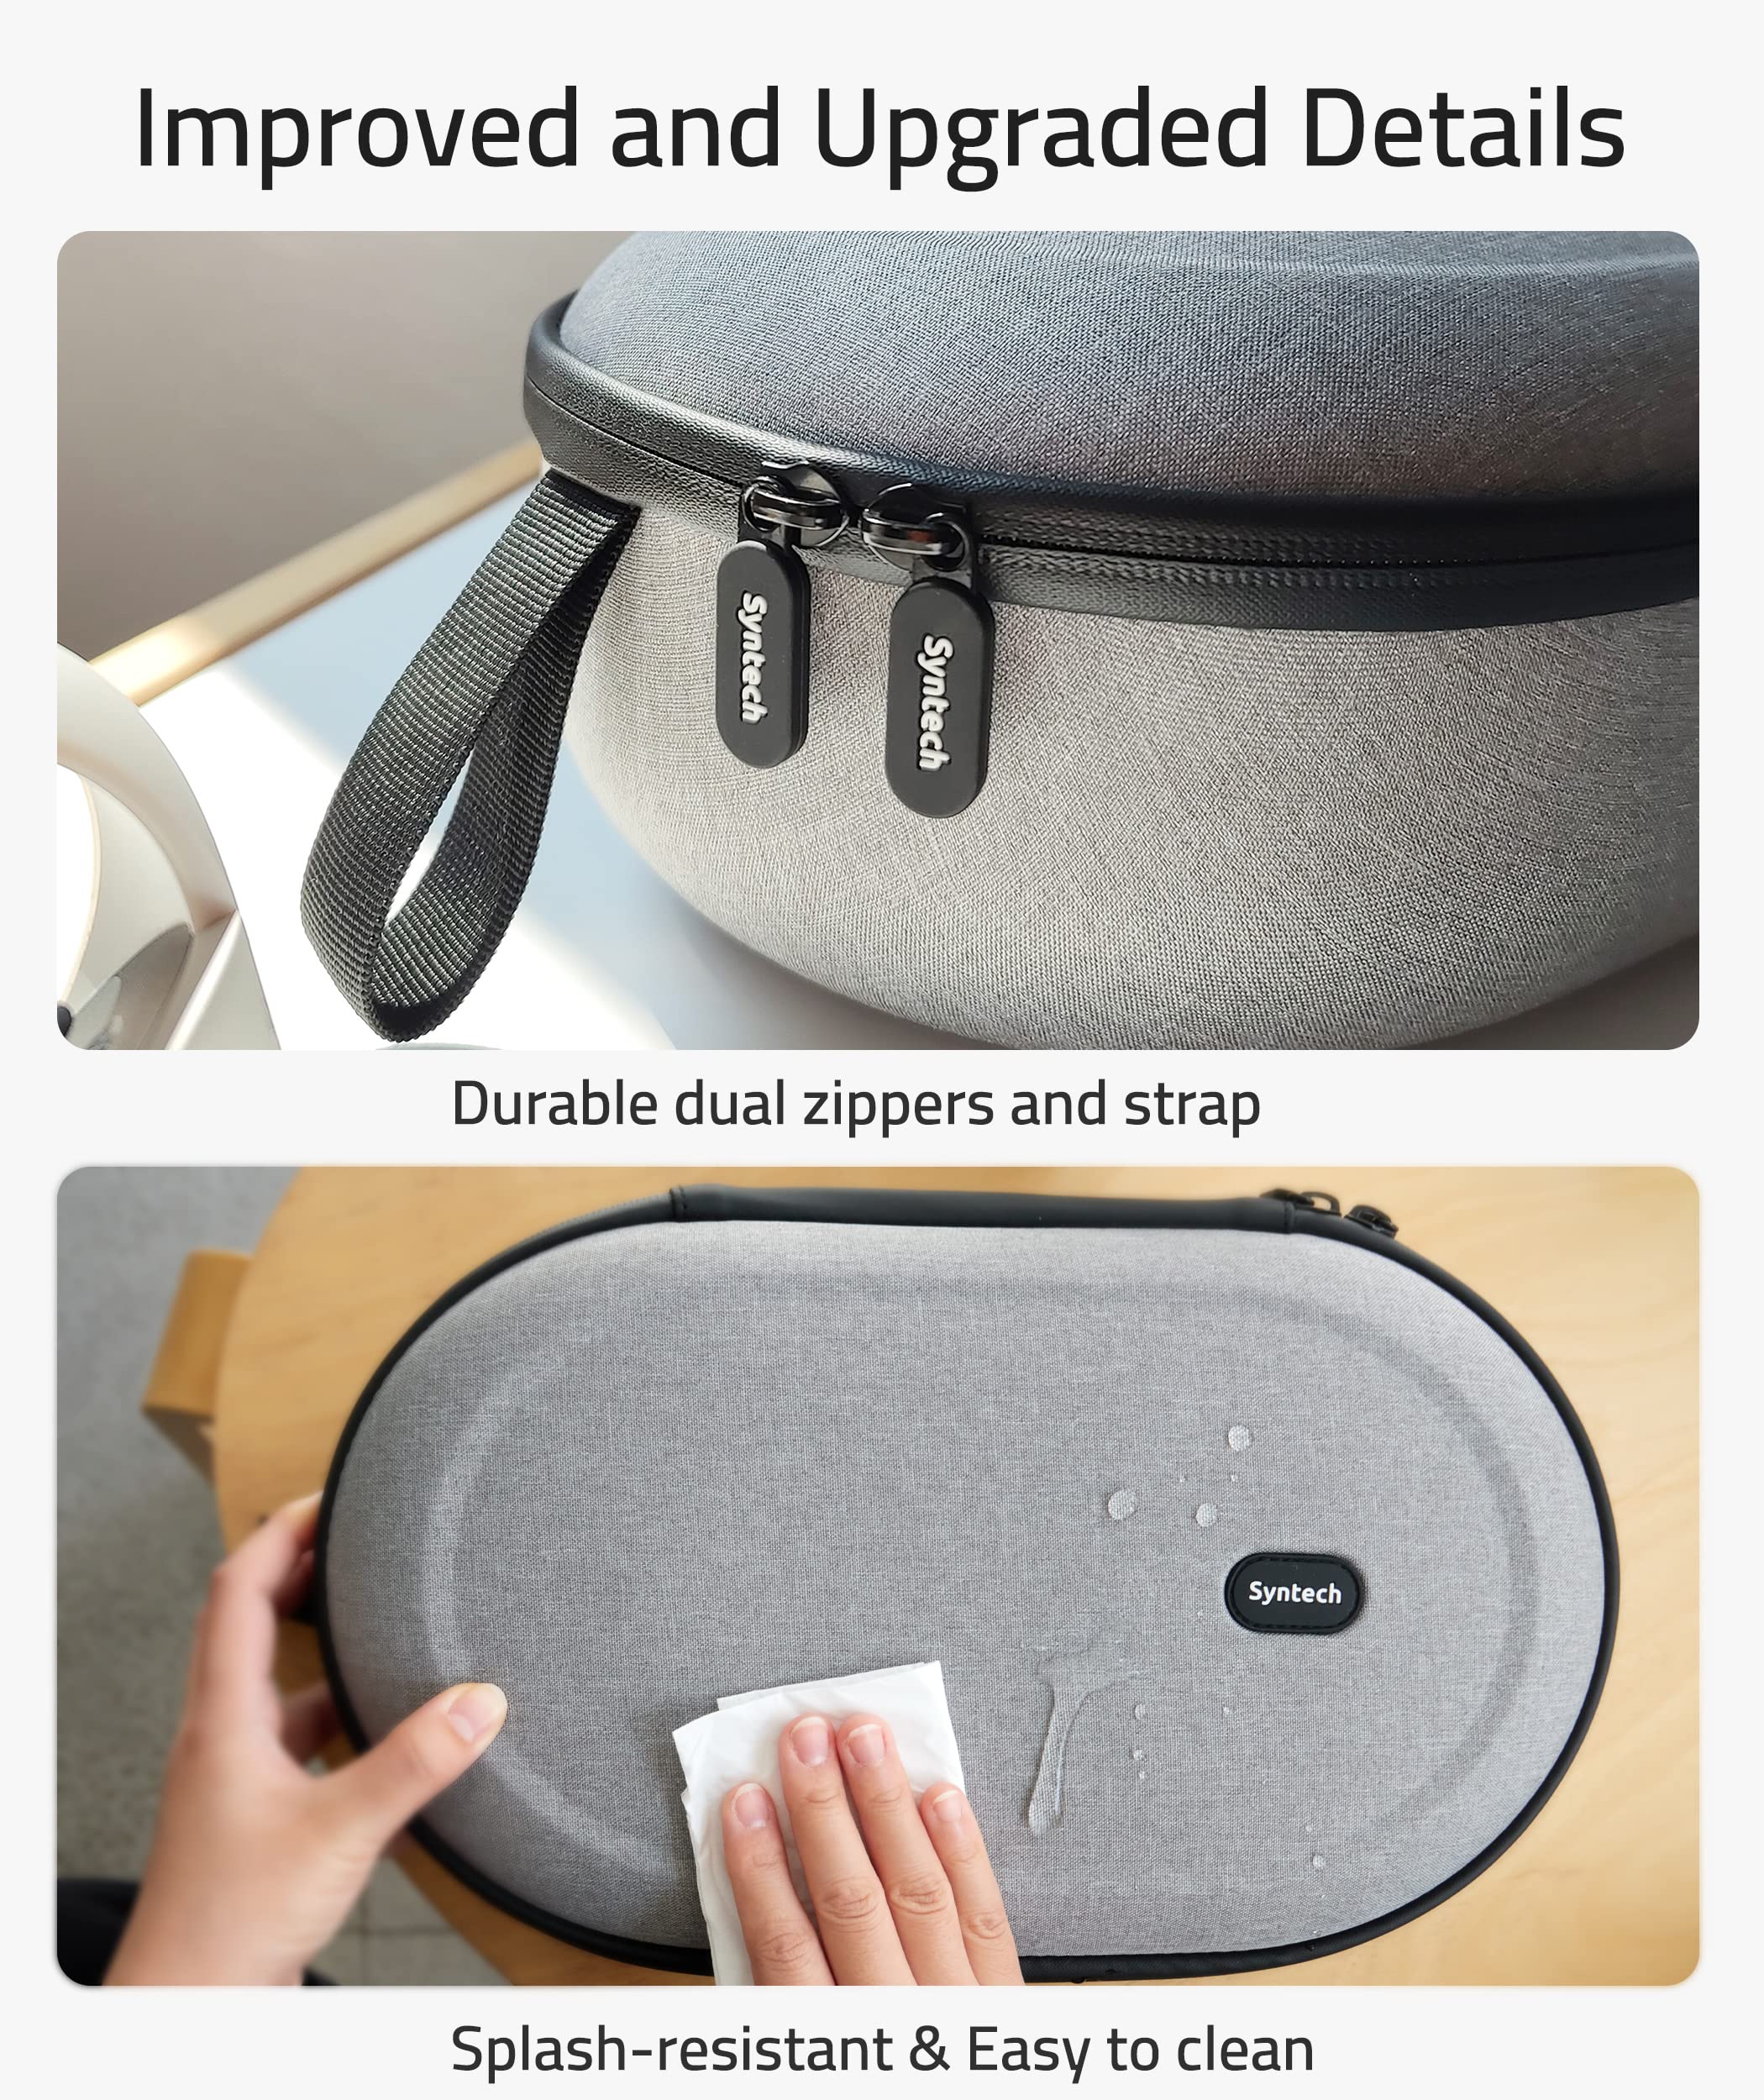 Hard Carrying Case for VR Headset